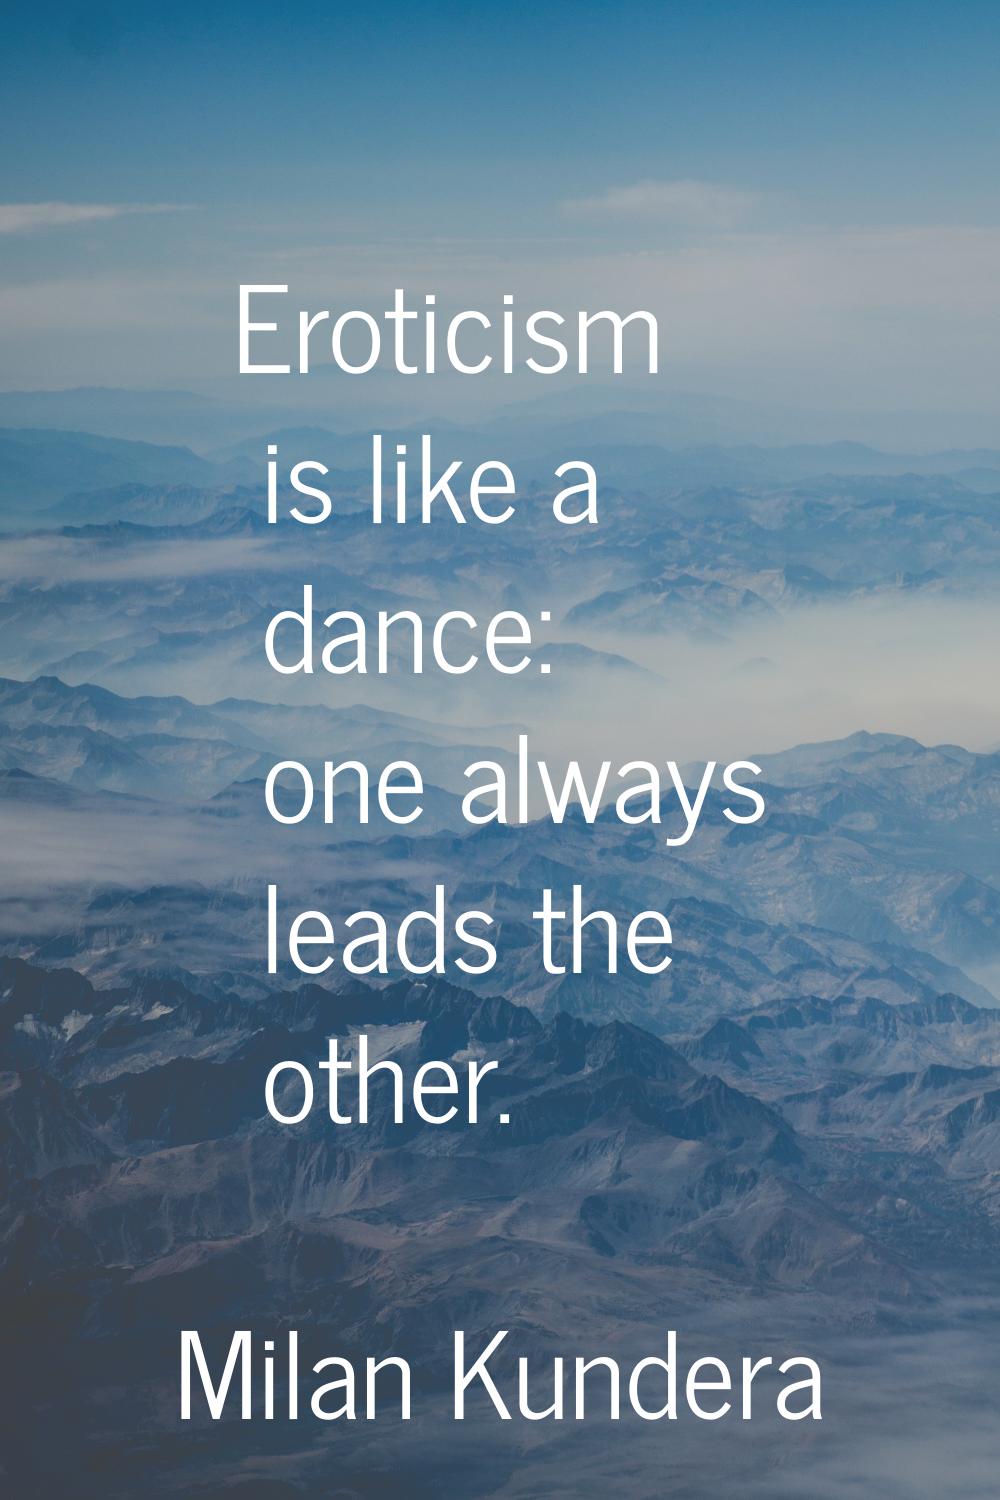 Eroticism is like a dance: one always leads the other.